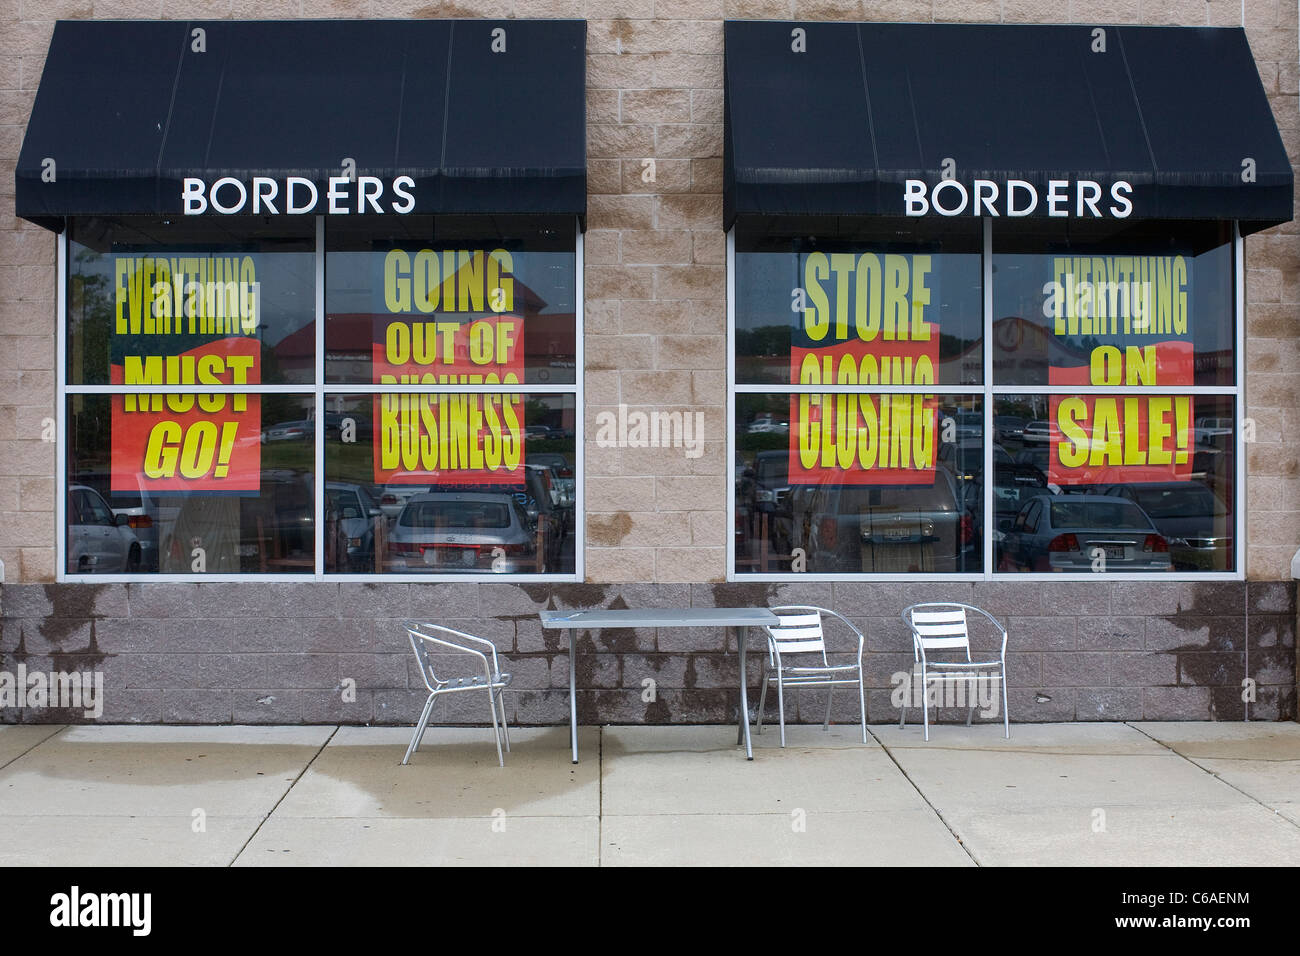 A Borders books store with a 'Going Out Of Business' banner.  Stock Photo